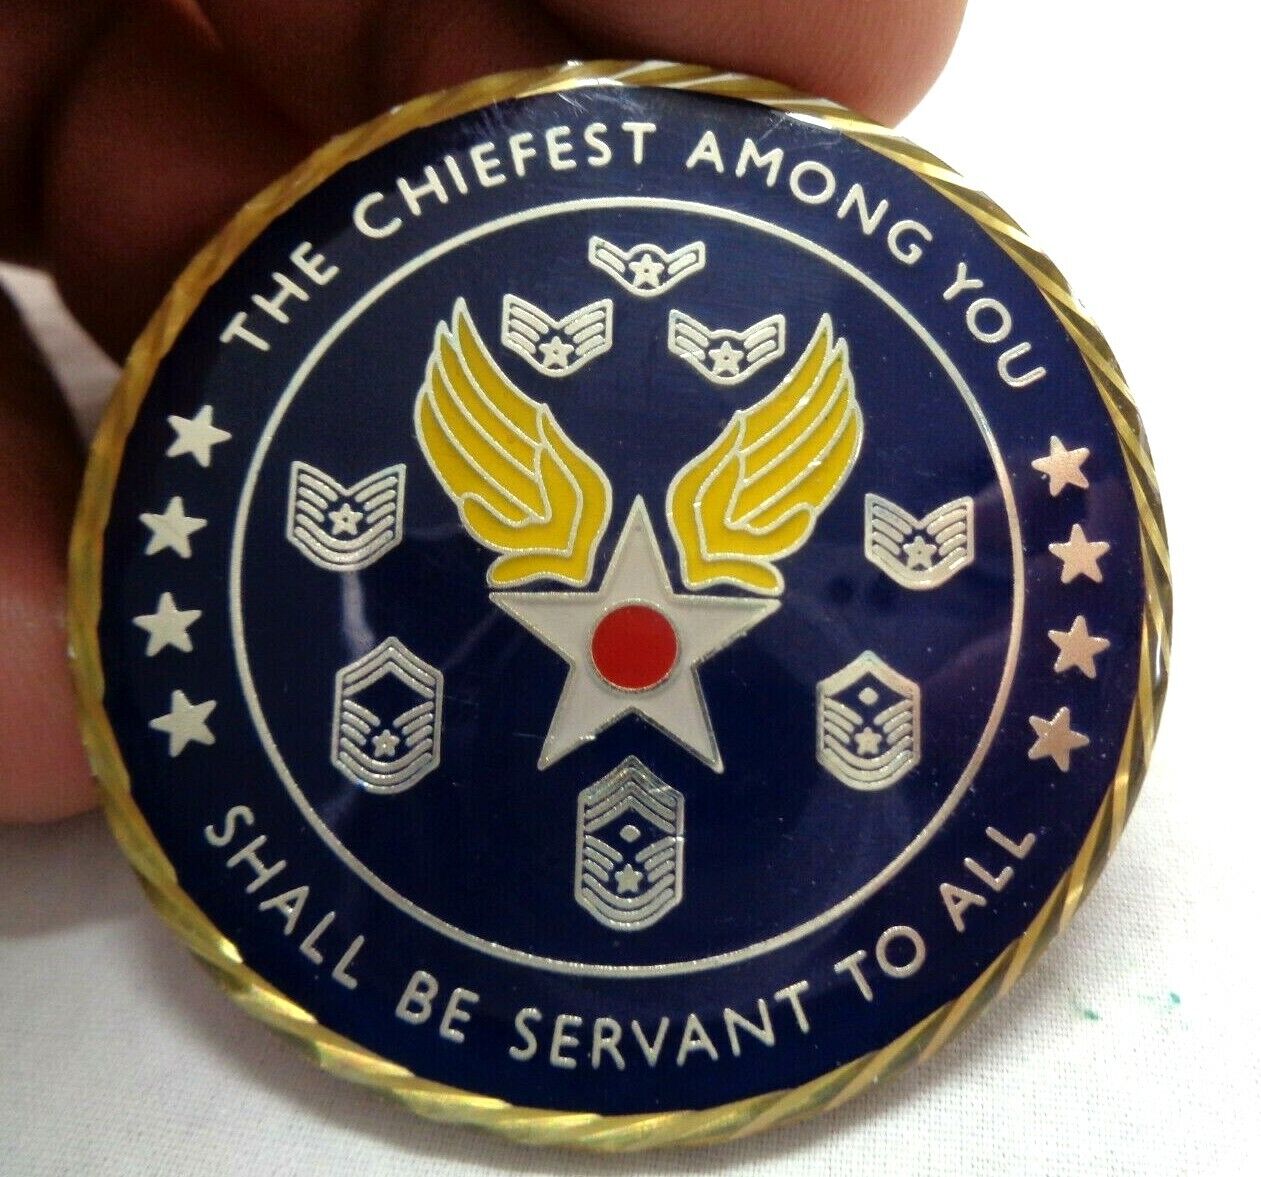 Air Combat Command The Chiefest Among You Shall Be Servant to All Challenge Coin